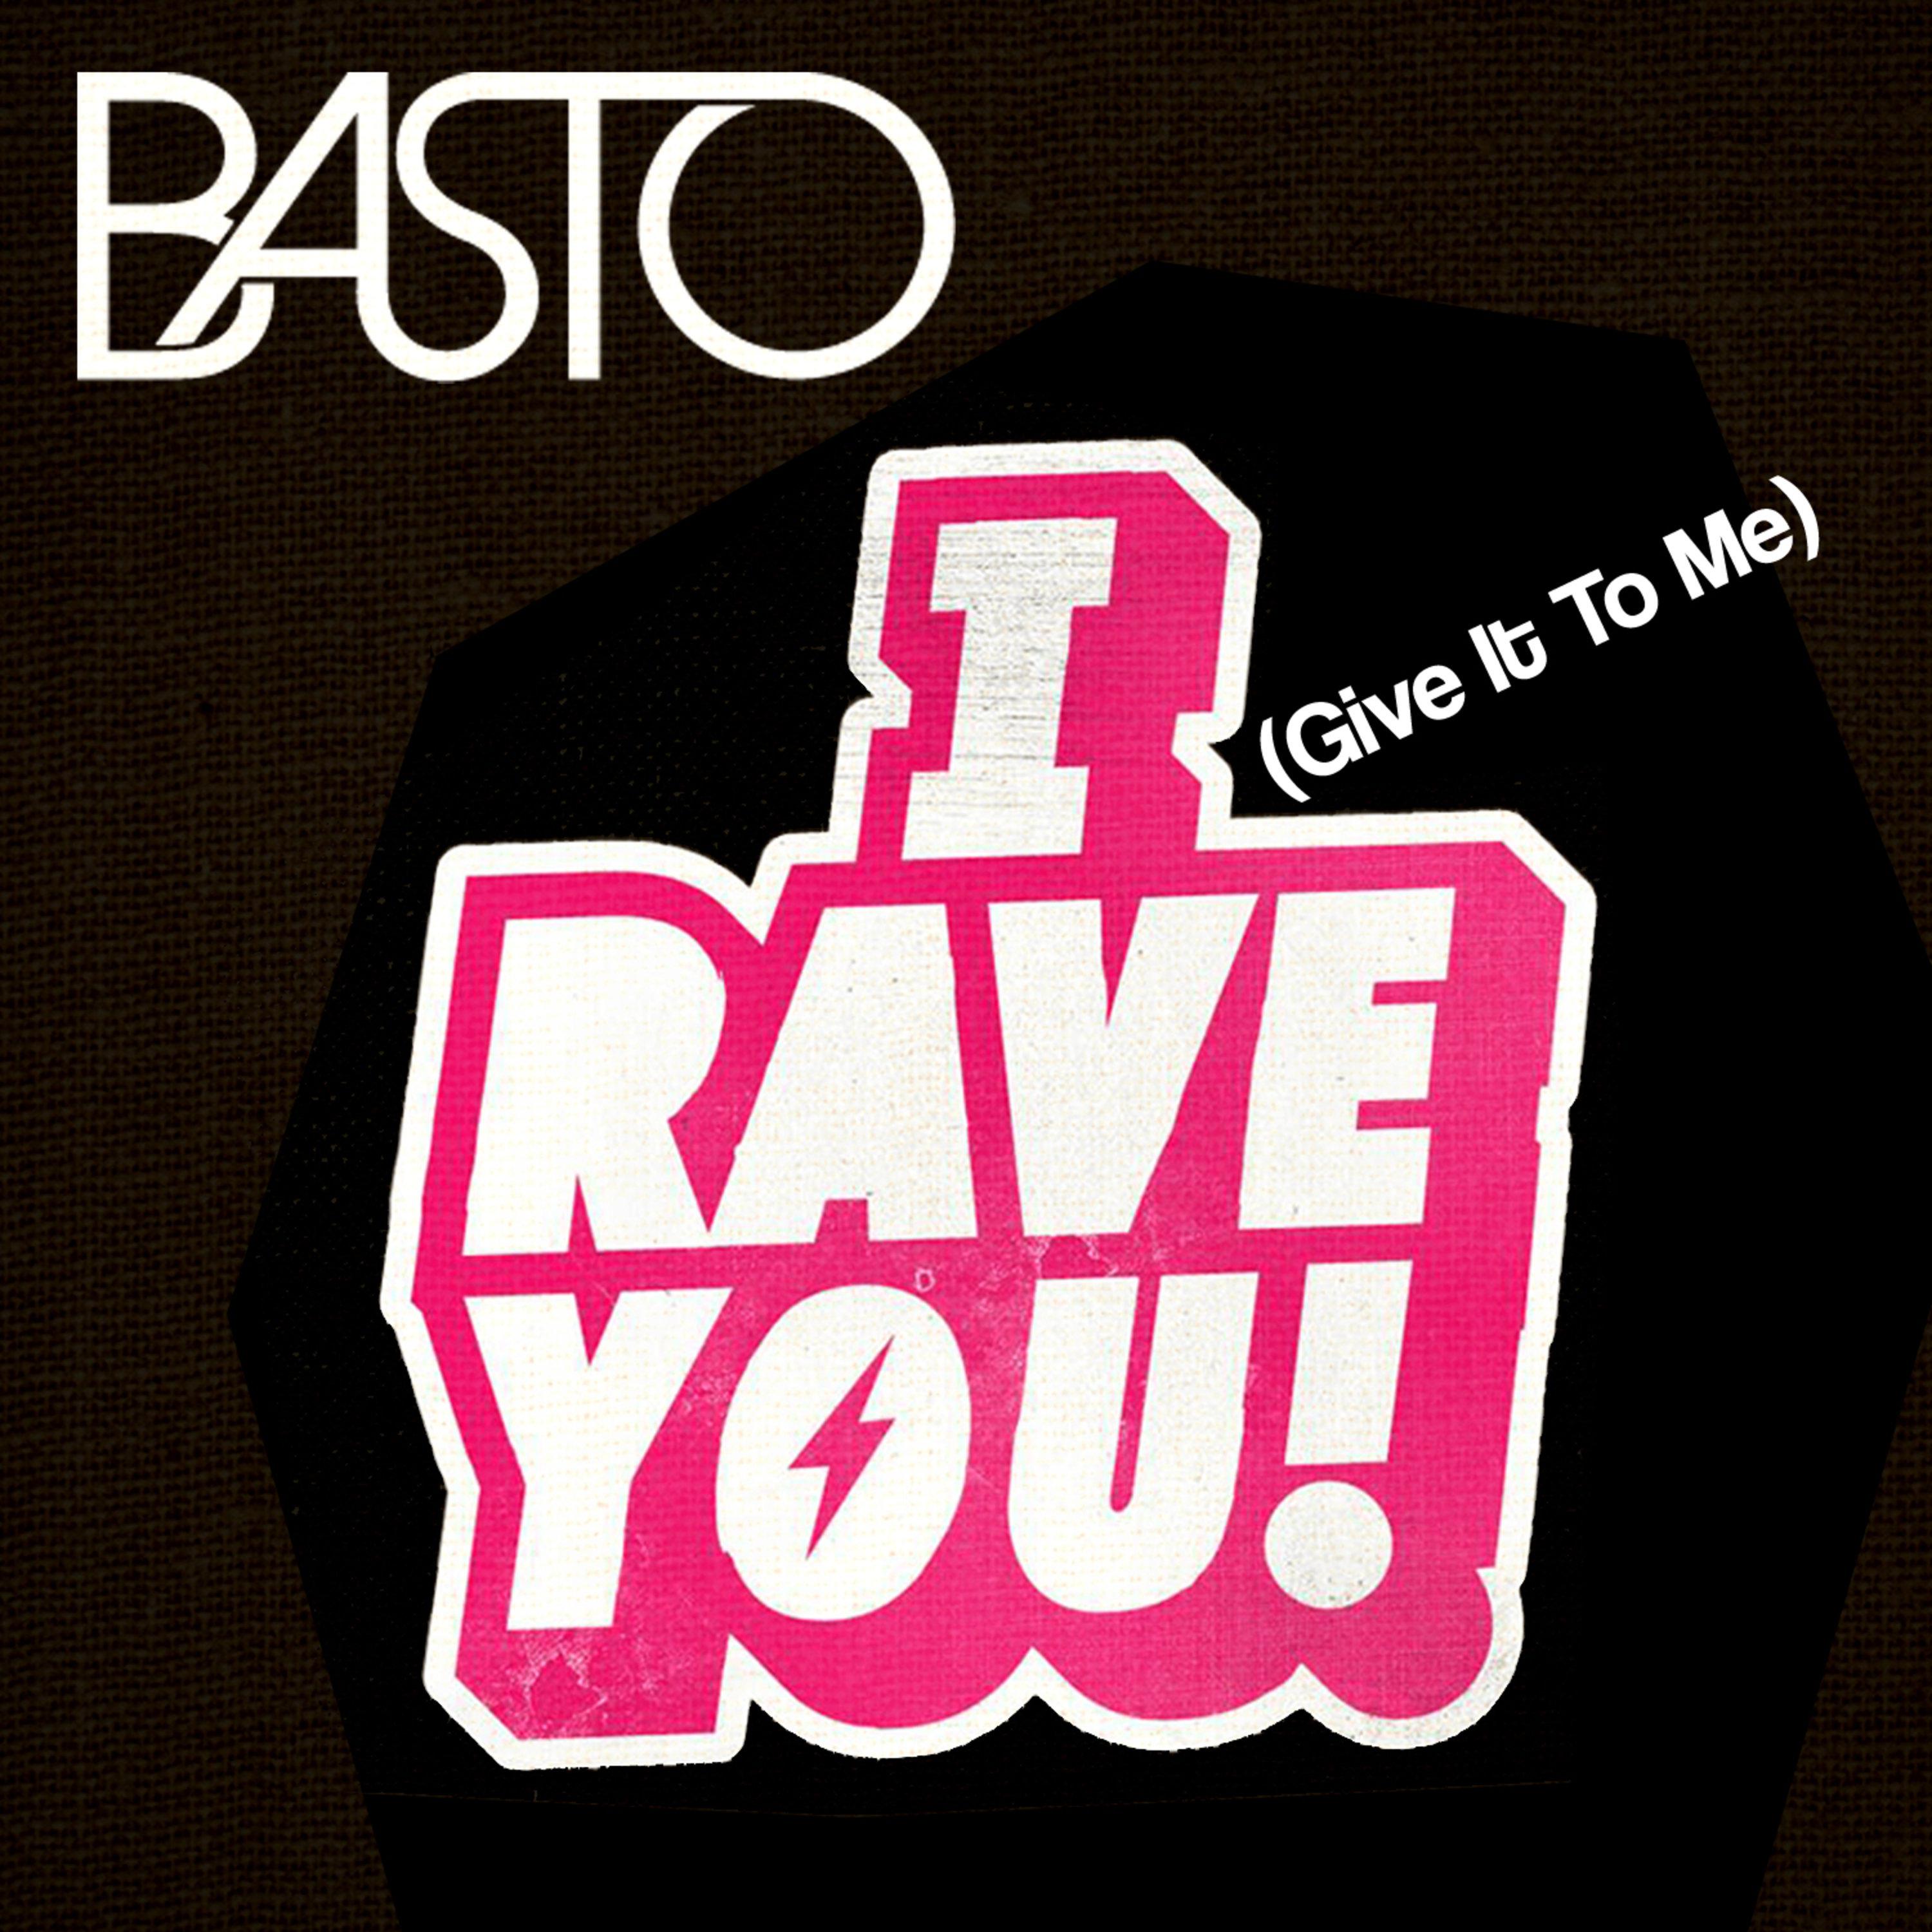 I Rave You (Give It To Me) (Radio Edit)